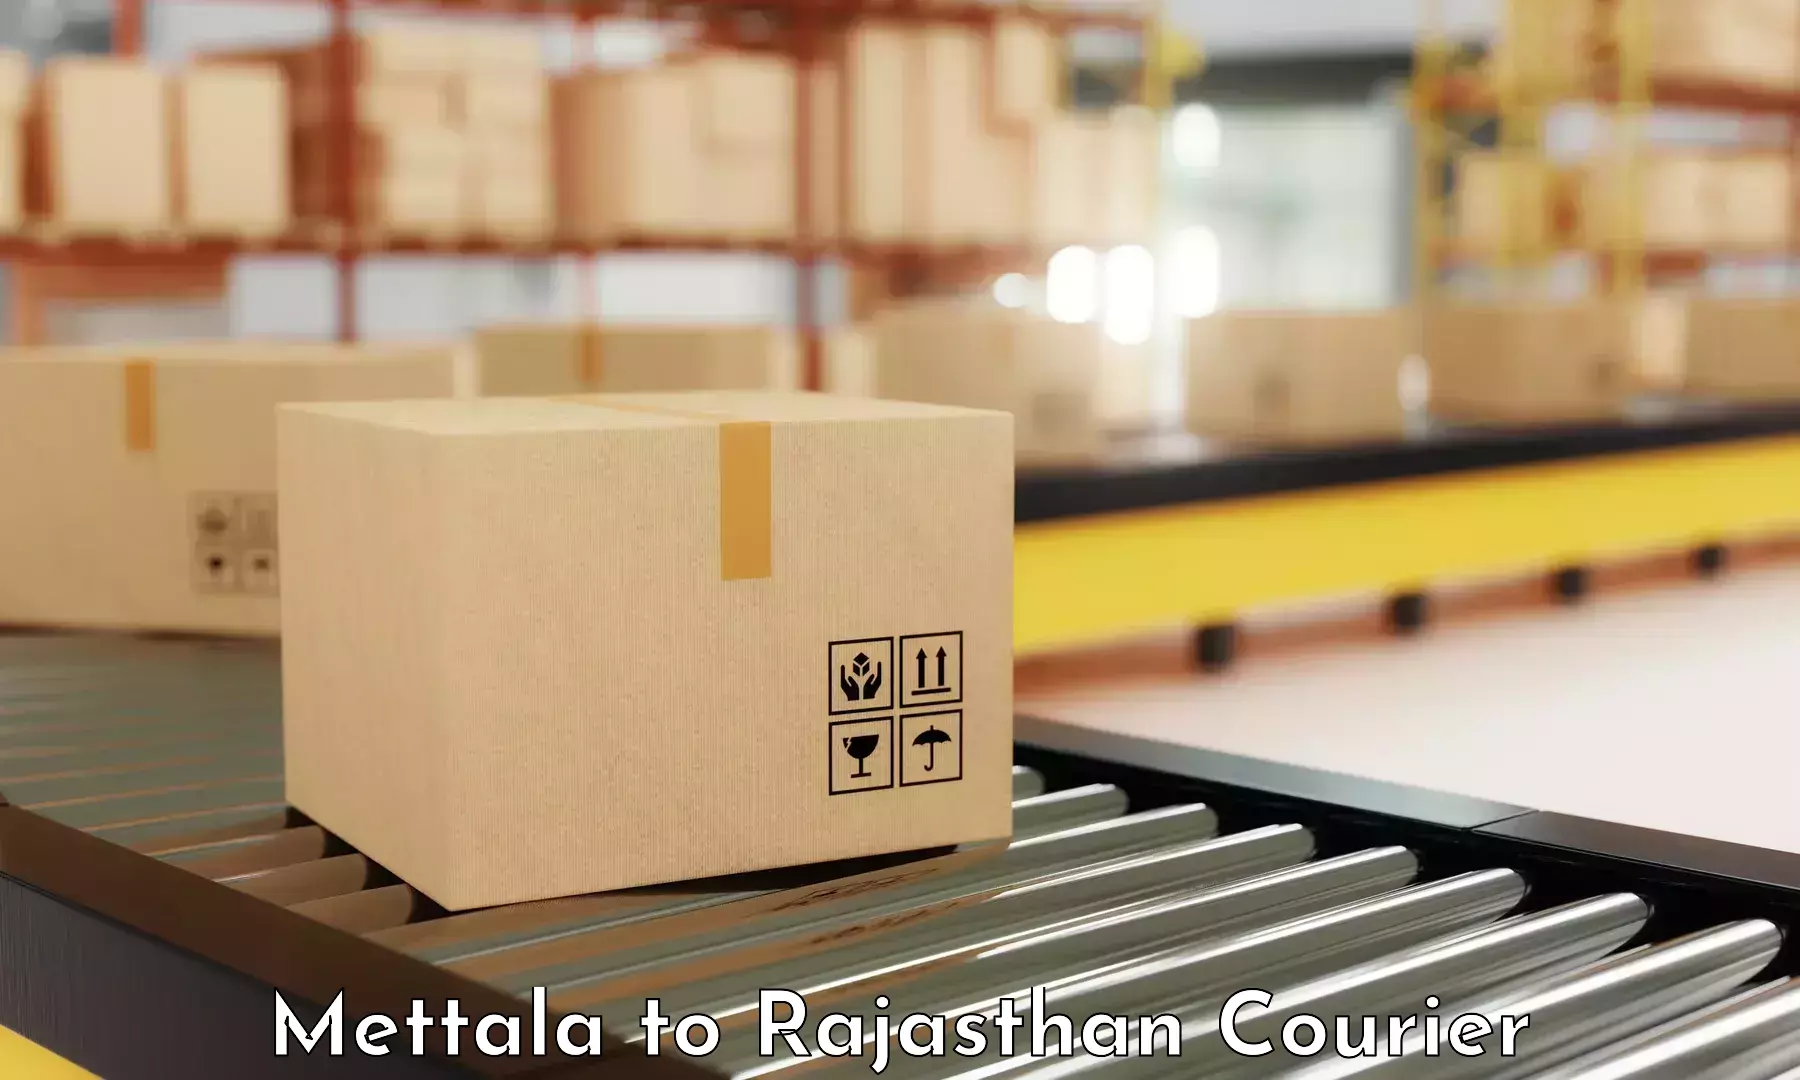 Automated shipping processes Mettala to Rajasthan